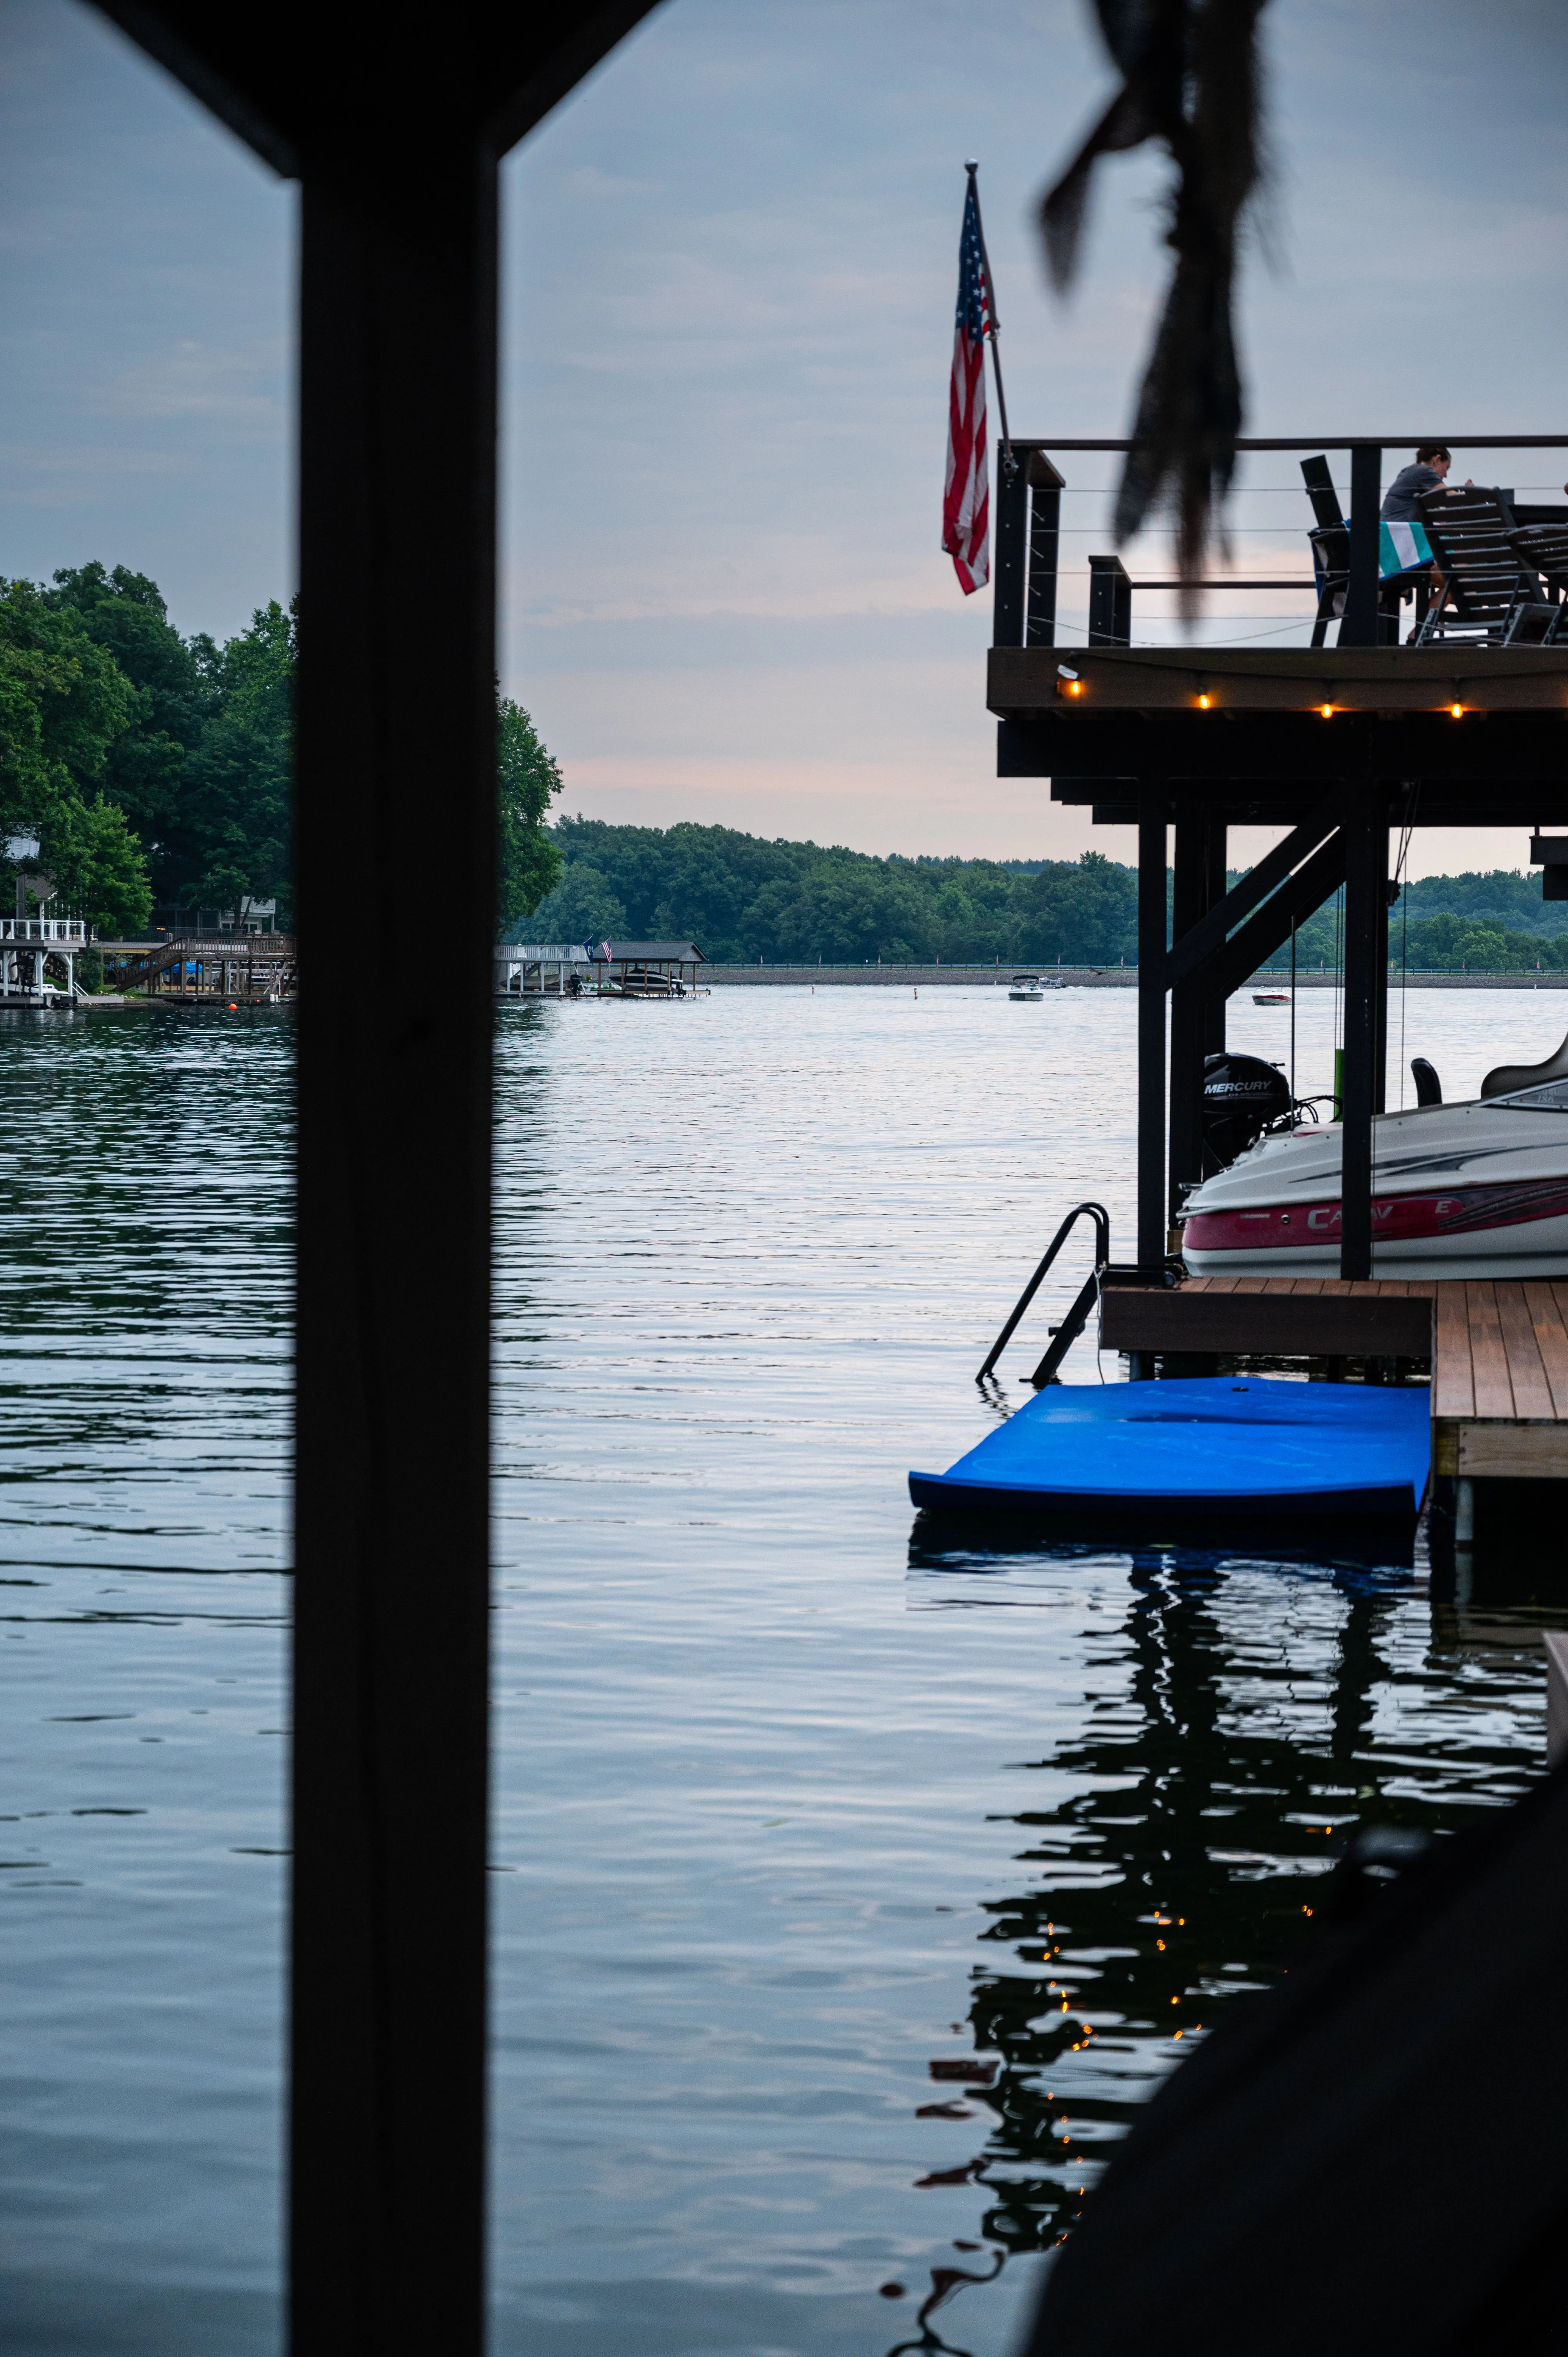 Tranquil lake view with a dock, a fluttering American flag, and a diving platform in the early evening.